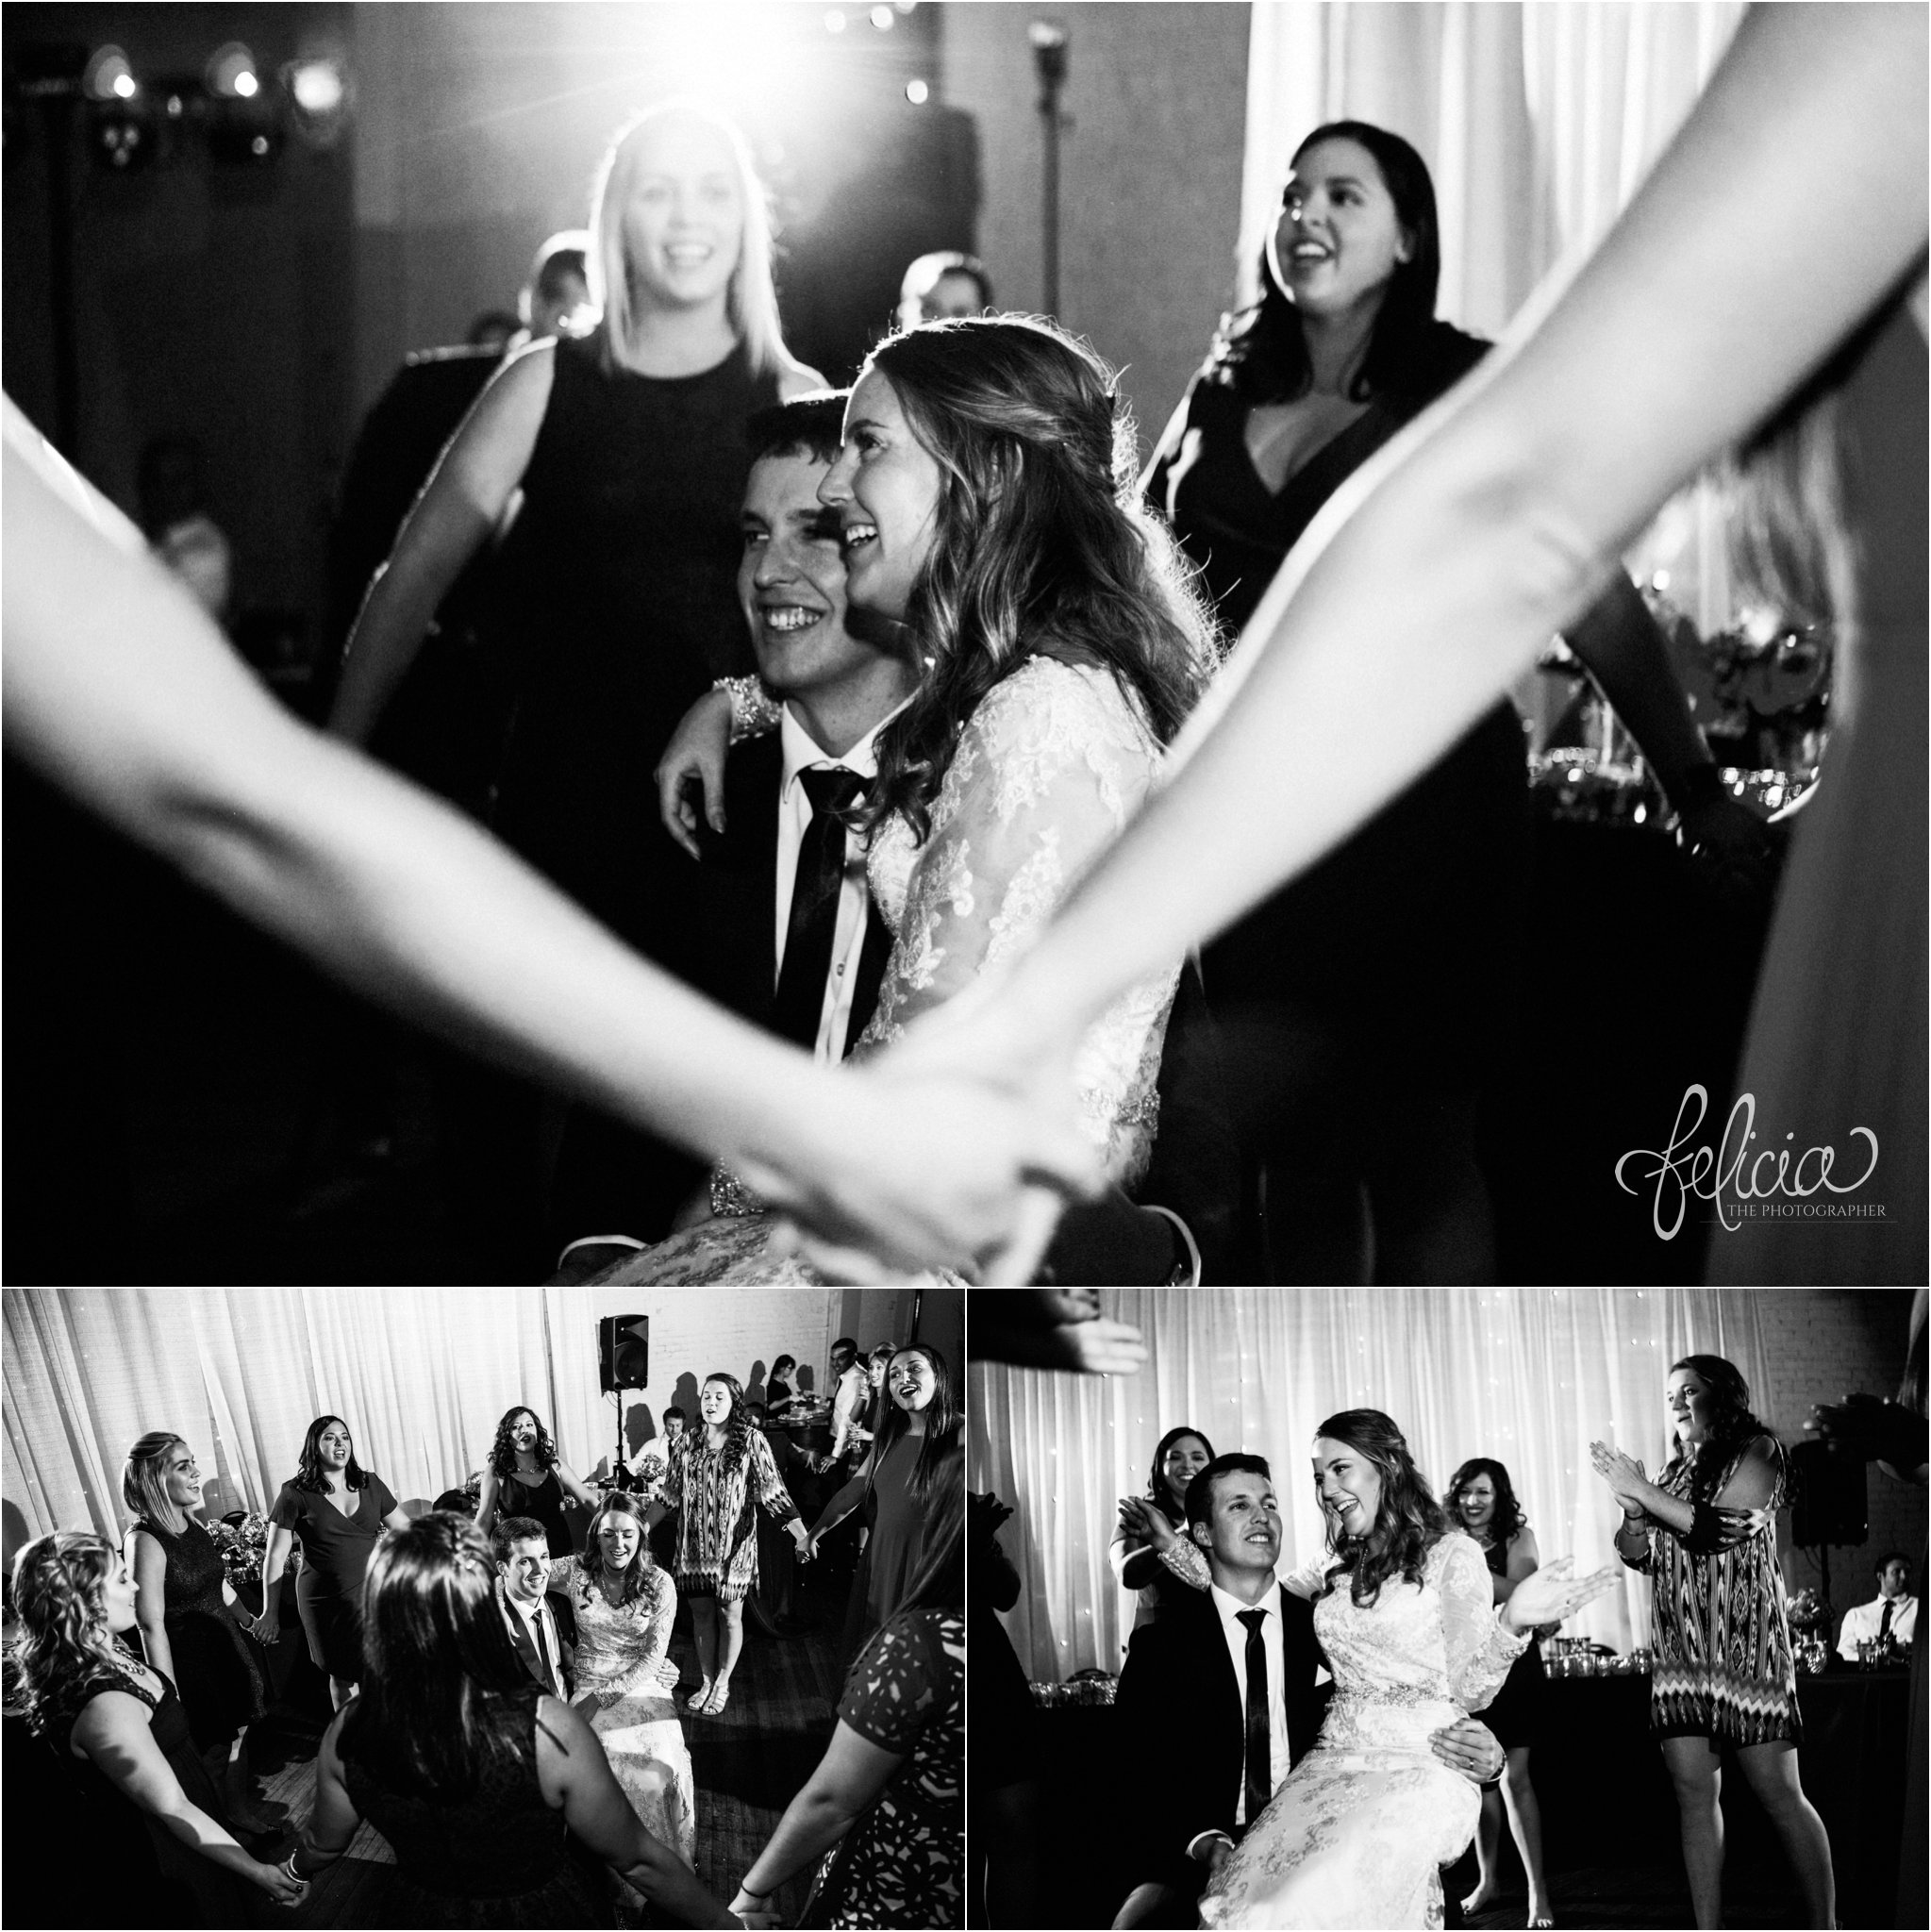 black and white | weddings | wedding photos | wedding photography | images by feliciathephotographer.com | St. Therese Catholic Church | Kansas City | downtown | The Terrace on Grand | reception | reception activities | wedding guests | candid | dancing | DJConnection | smiling bride 